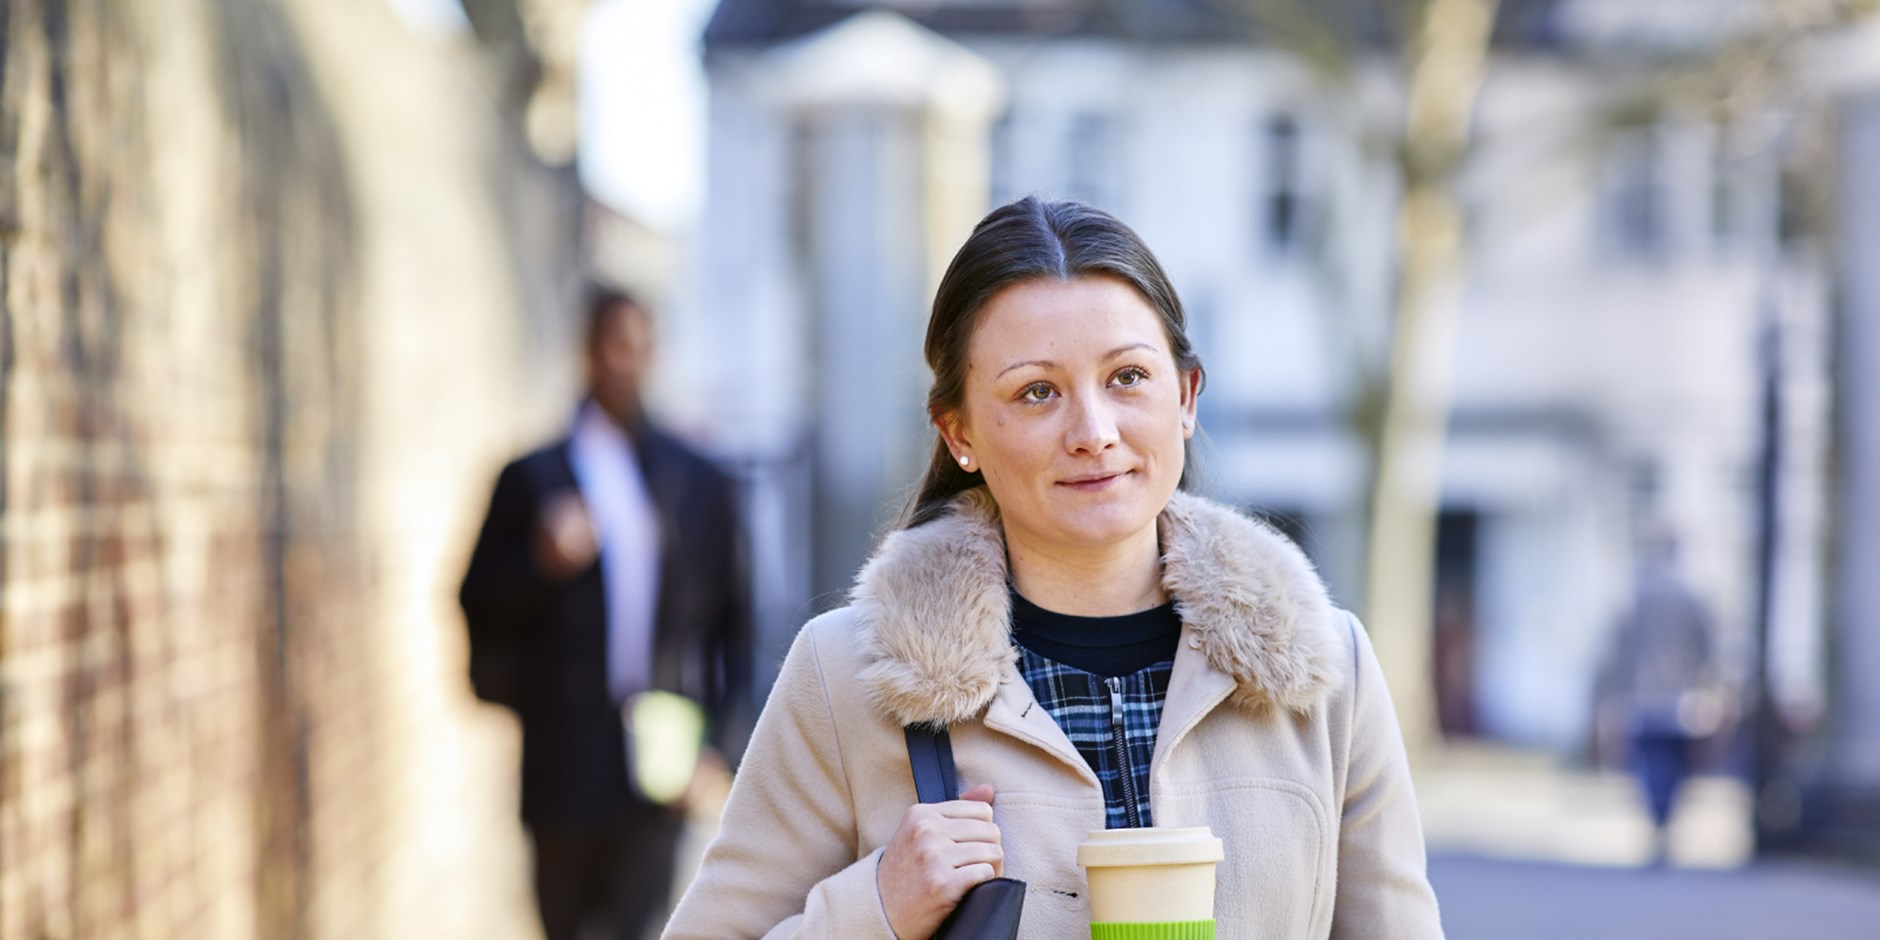 GSK employee walking to work while holding a coffee